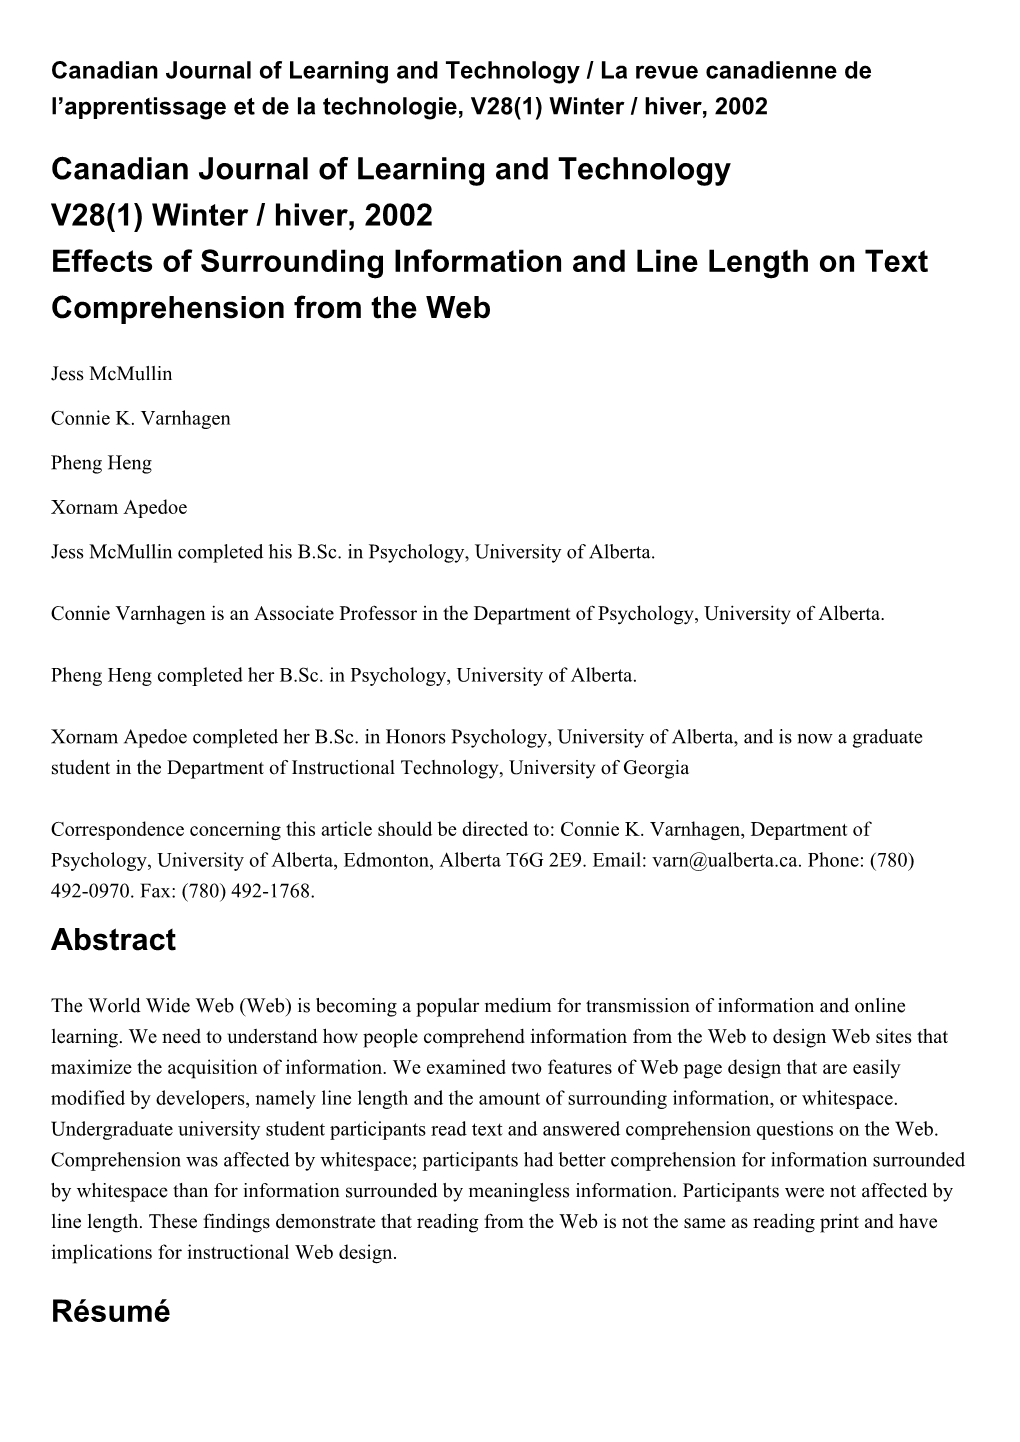 Effects of Surrounding Information and Line Length on Text Comprehension from the Web